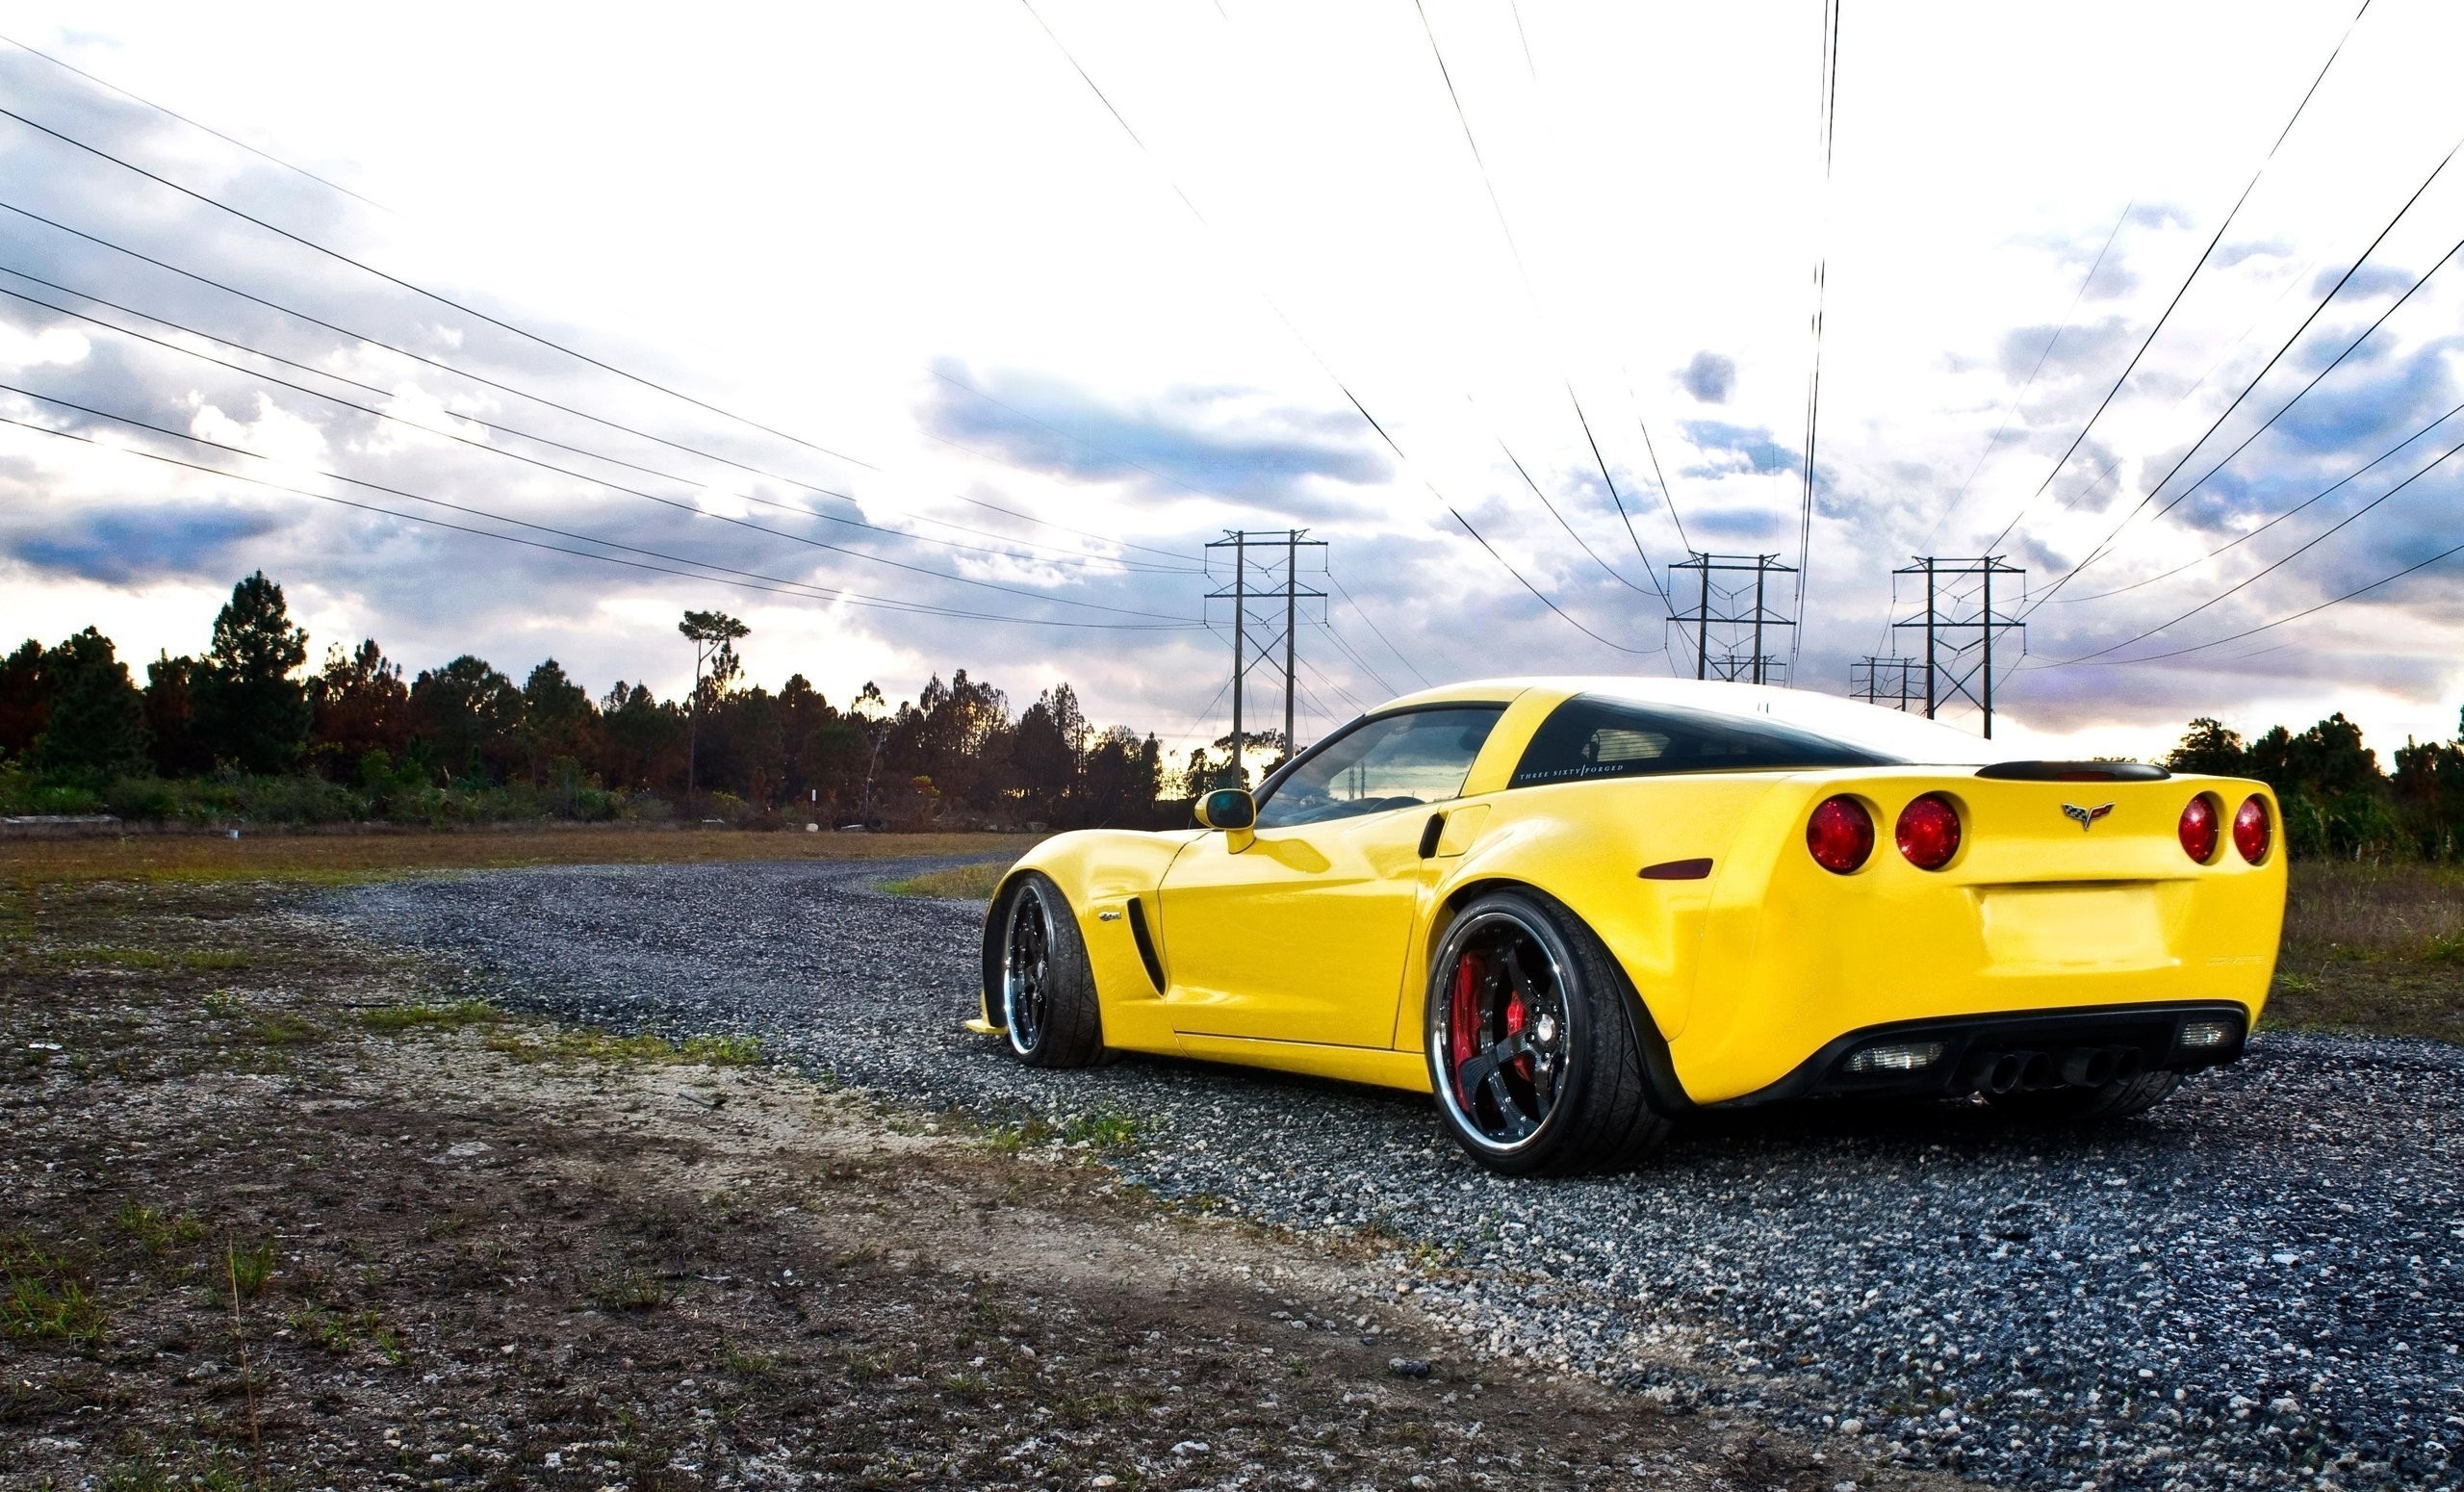 General 2560x1550 car yellow cars vehicle outdoors